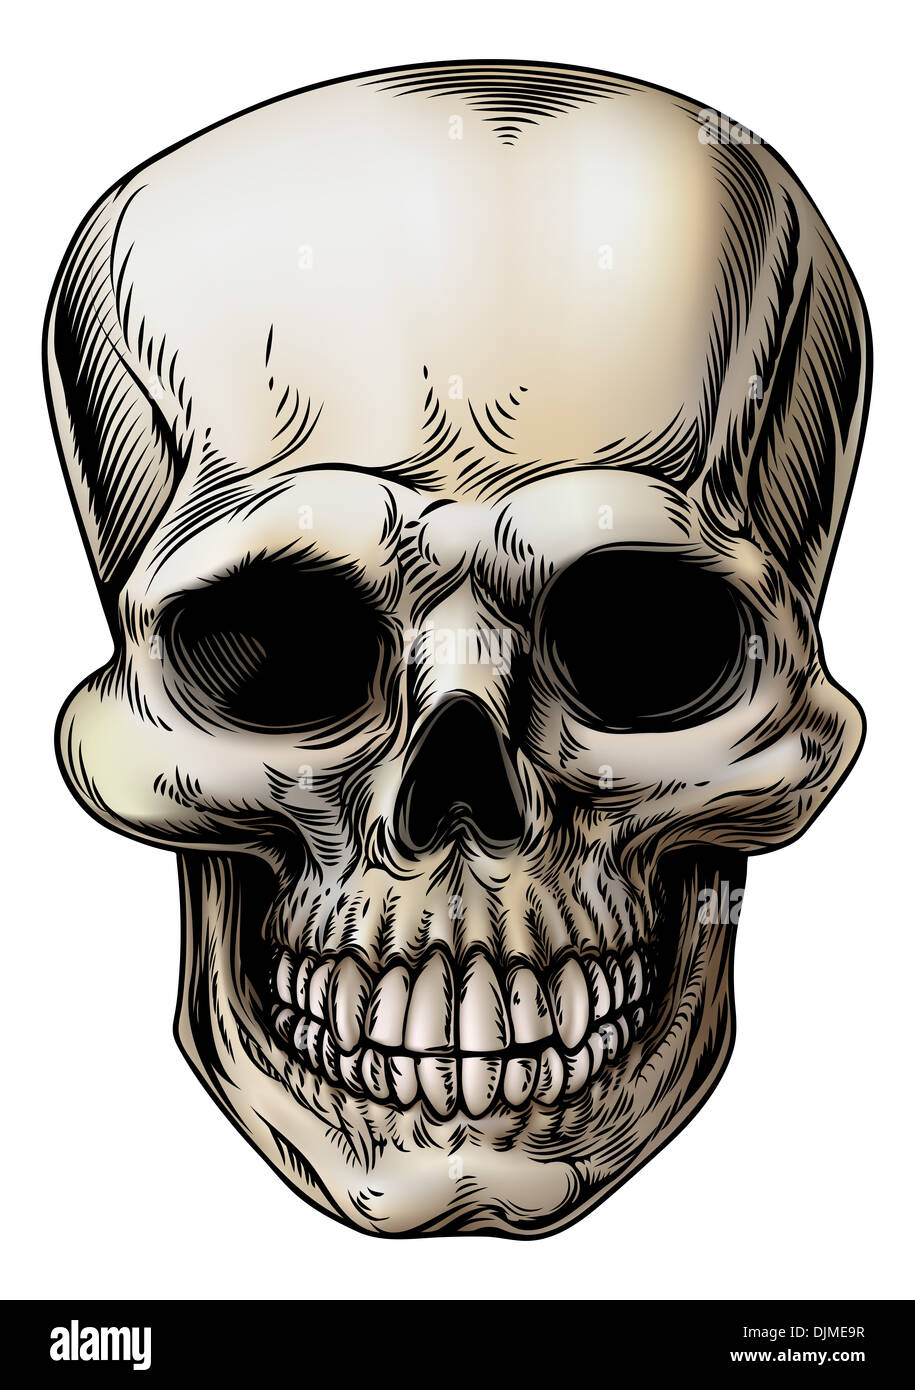 A human Skull or grim reaper skeleton head illustration in a vintage style Stock Photo